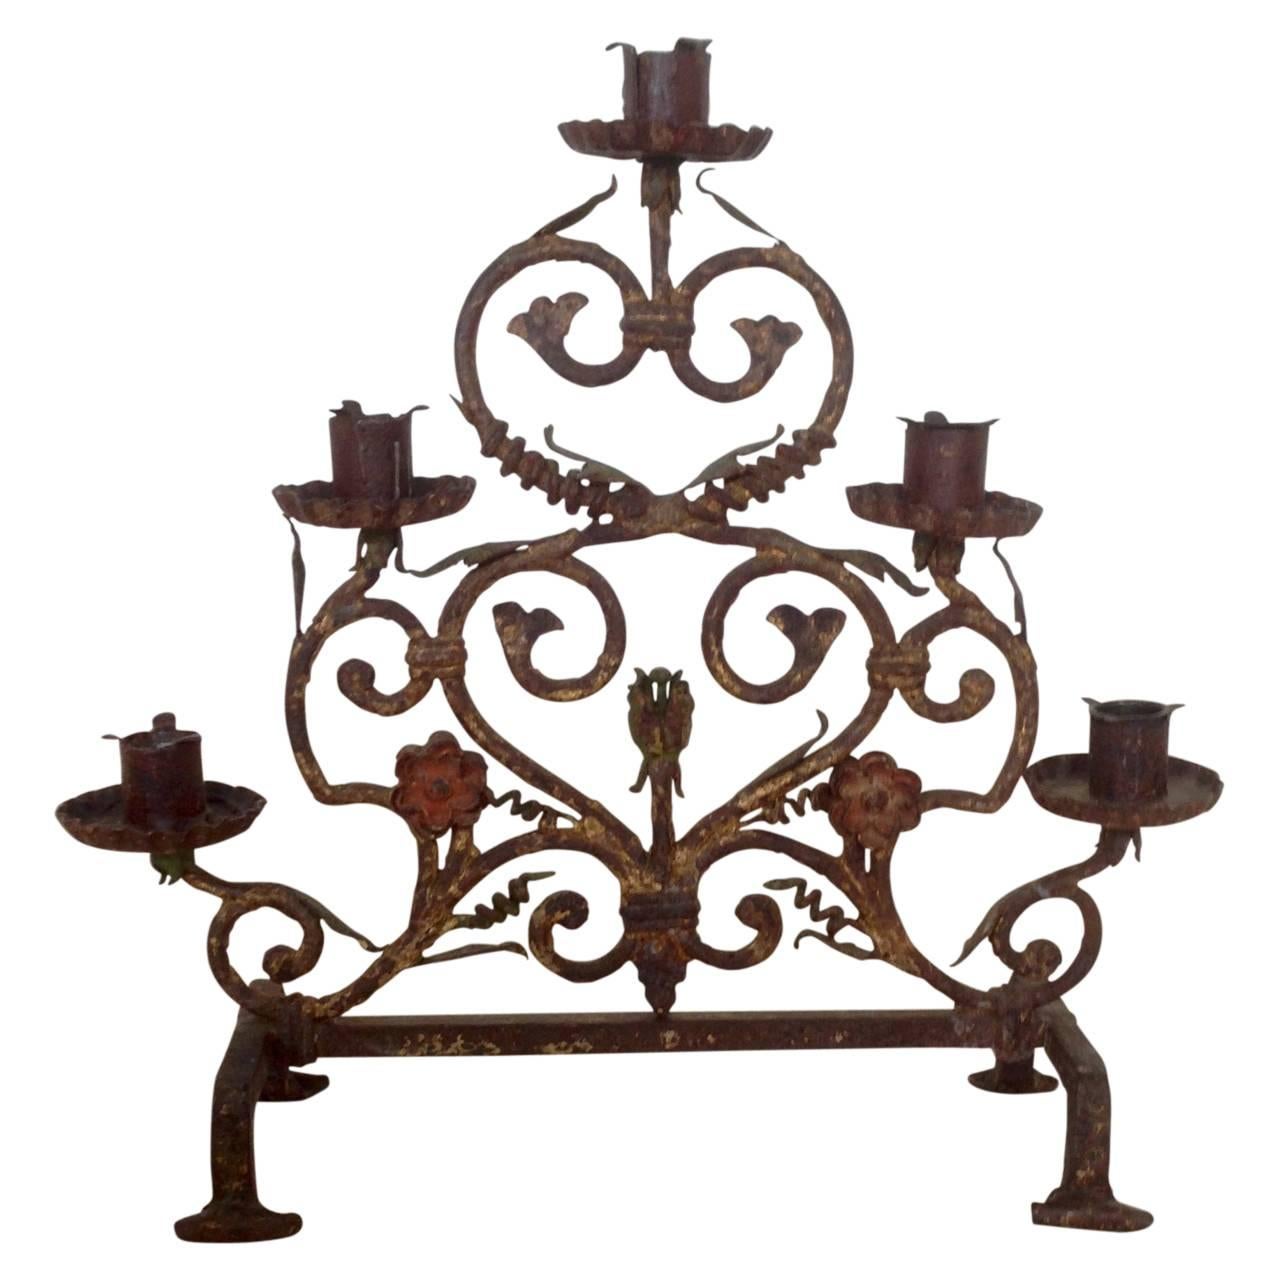 Early 19th Century Fireplace Candelabra